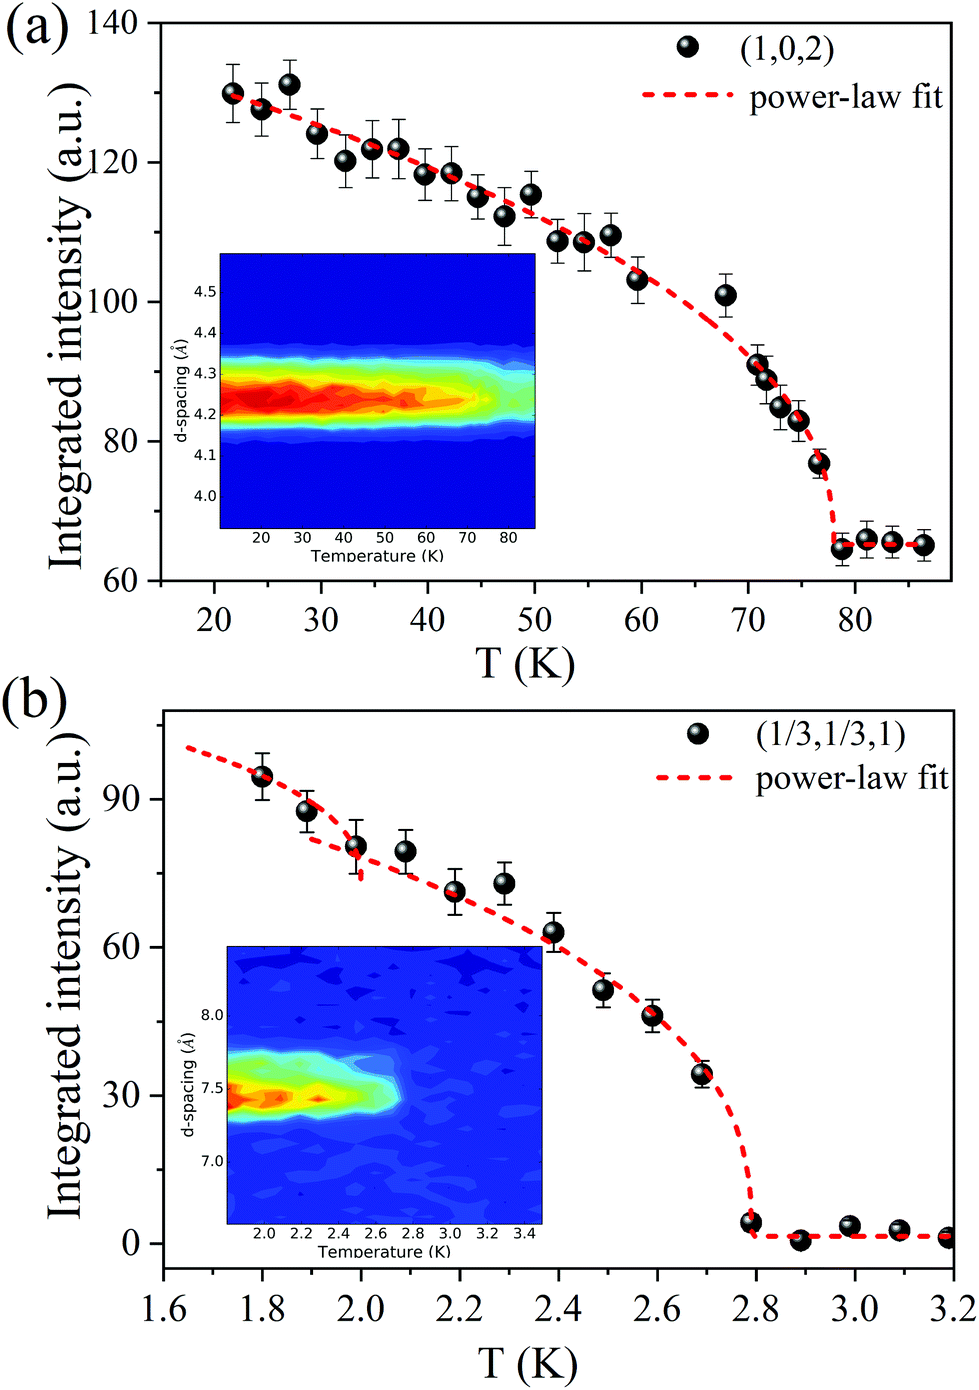 Single Crystal Neutron And Magnetic Measurements Of Rb2mn3 Vo4 2co3 And K2co3 Vo4 2co3 With Mixed Honeycomb And Triangular Magnetic Lattices Dalton Transactions Rsc Publishing